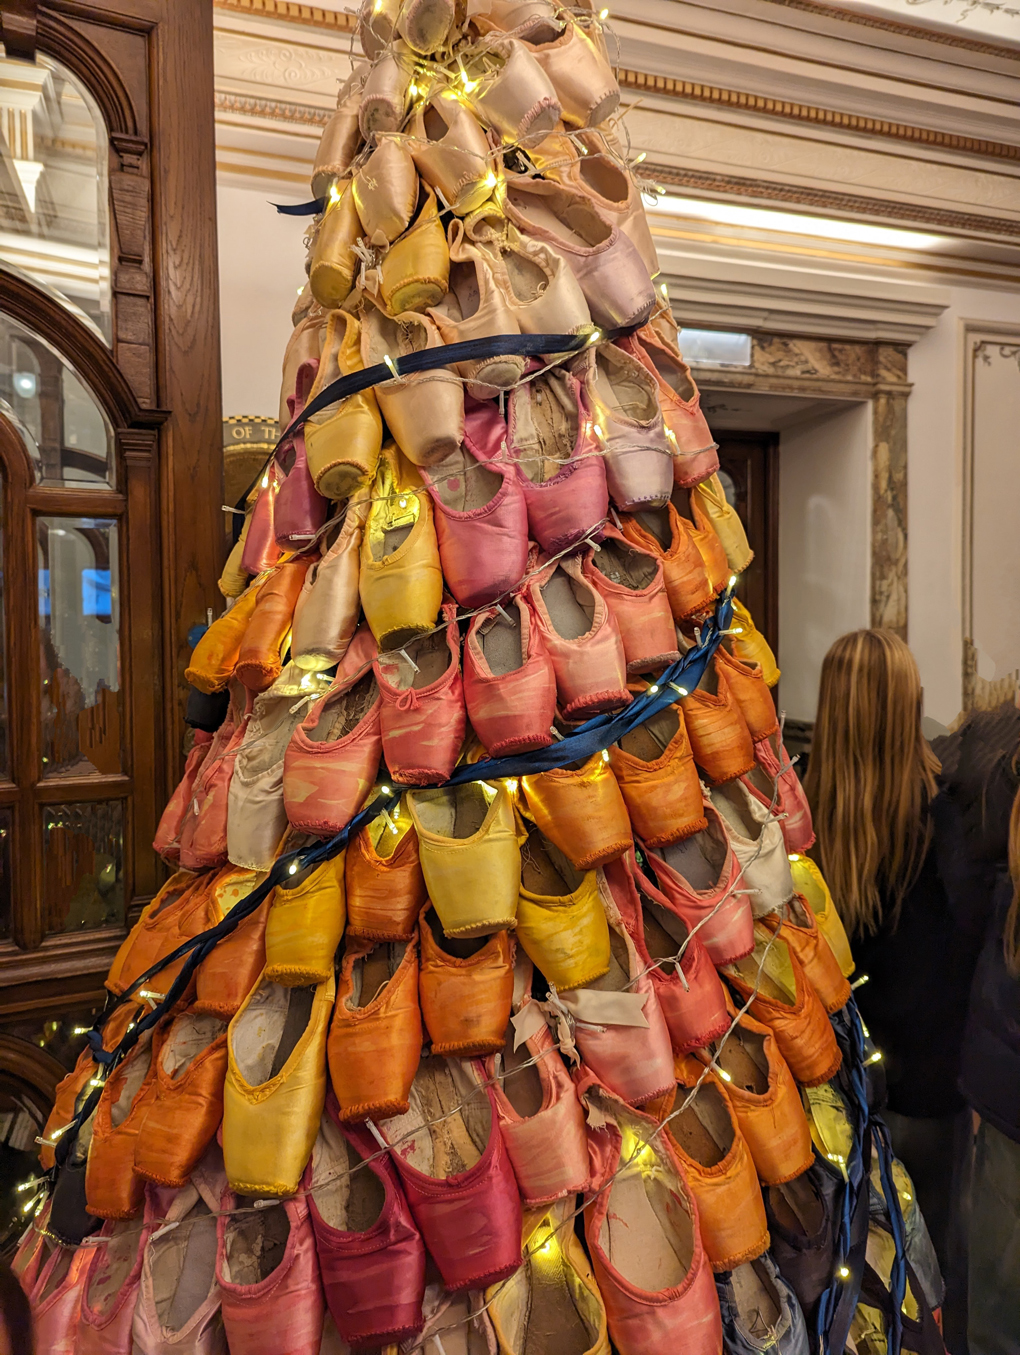 Xmas tree made from old worn dyed ballet shoes